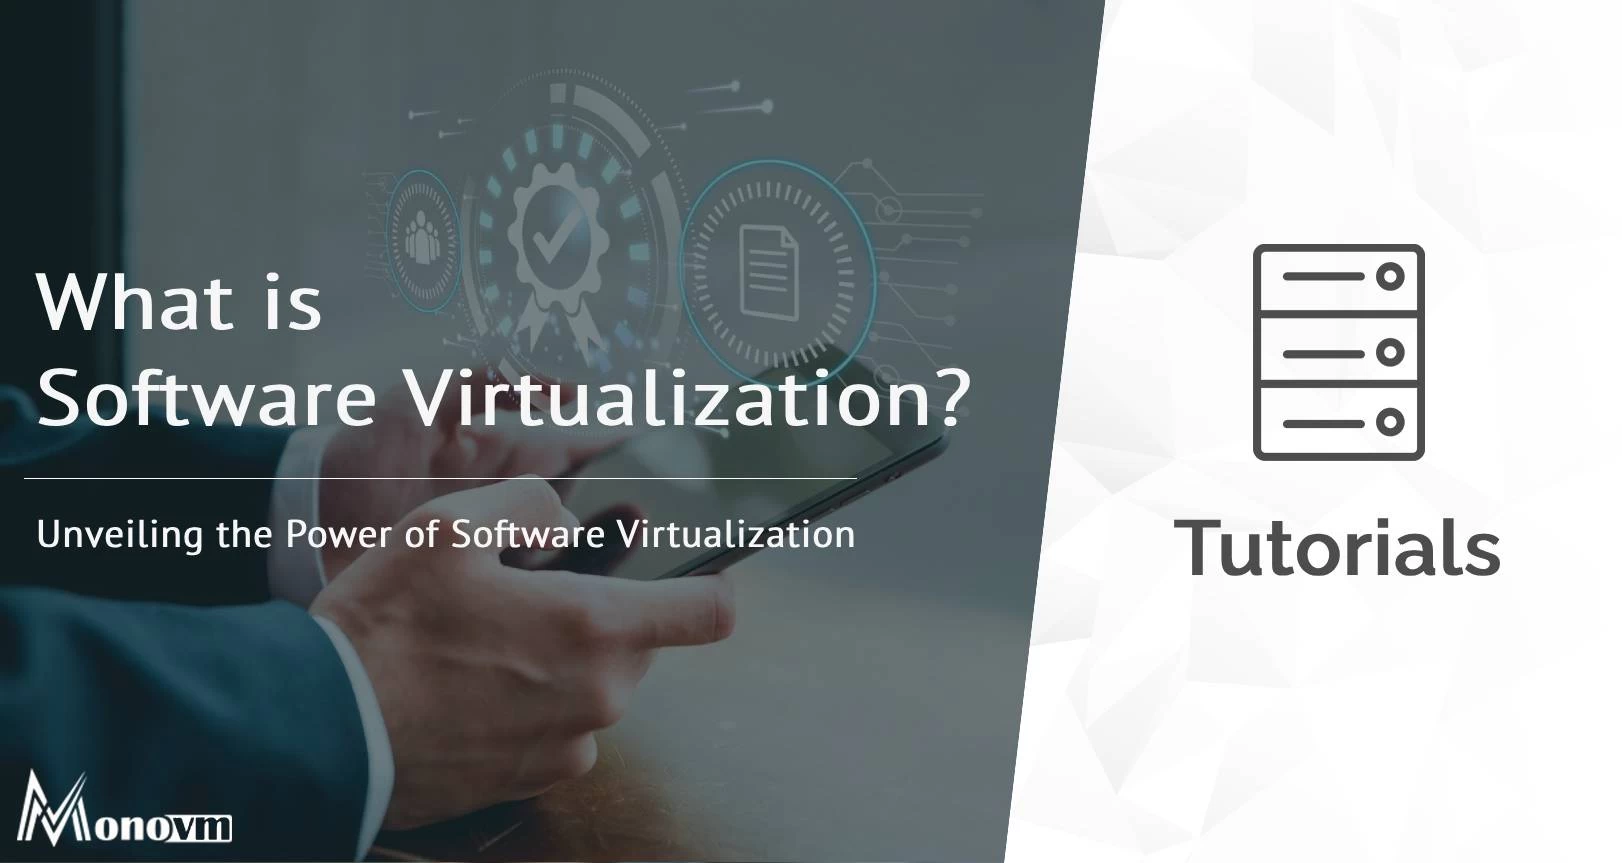 Unveiling the Power of Software Virtualization: What is Software Virtualization?